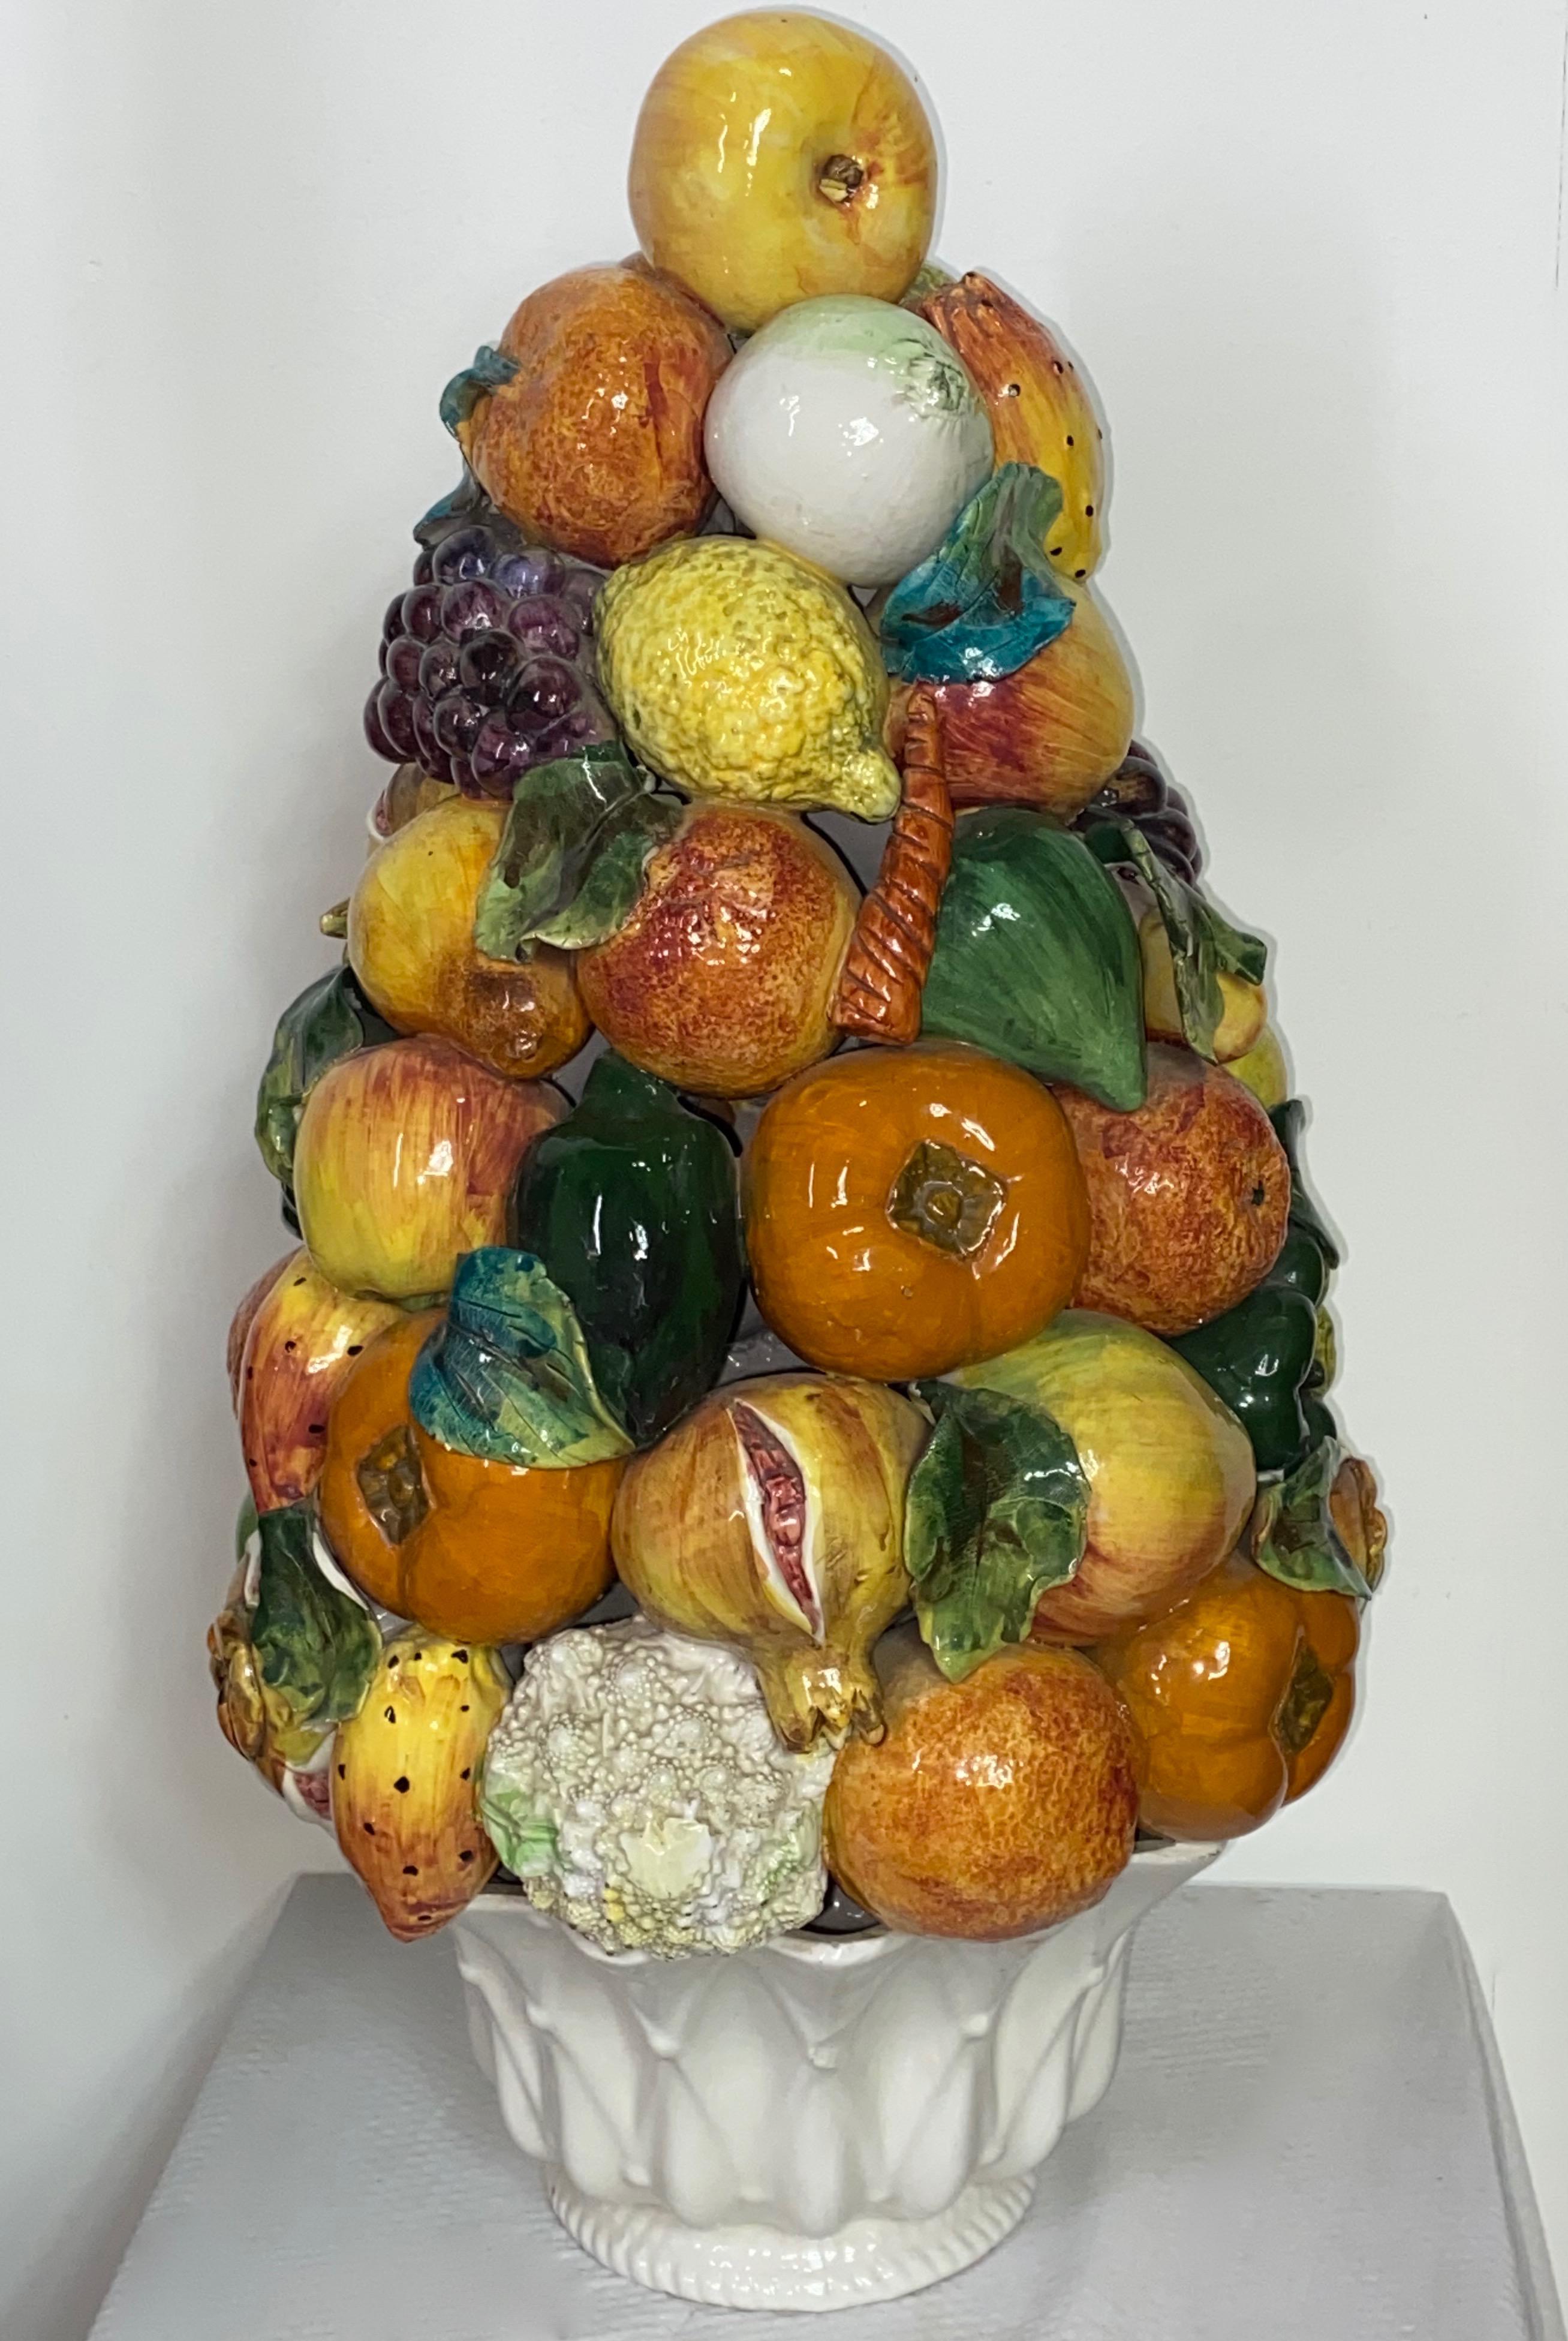 Large colorful glazed ceramic mixed fruit topiary made by the Bassano Zortea studio in northern Italy.
Mid 20th century, circa 1950.

Measures: 22” high, 13” wide.